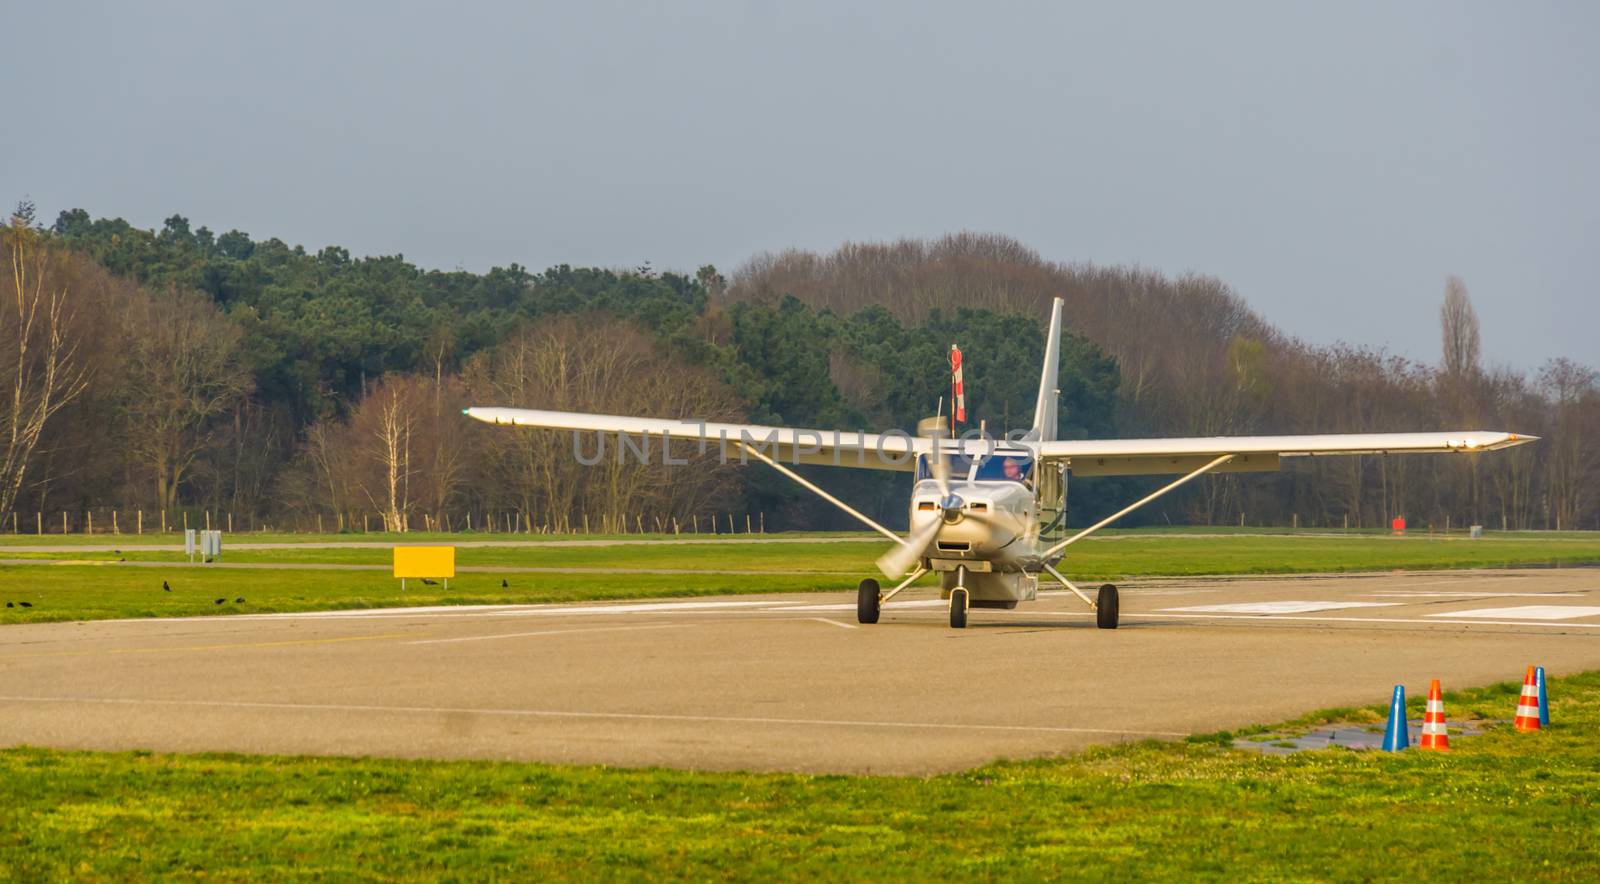 white airplane landing on the air strip, recreational sport and hobby, air transportation